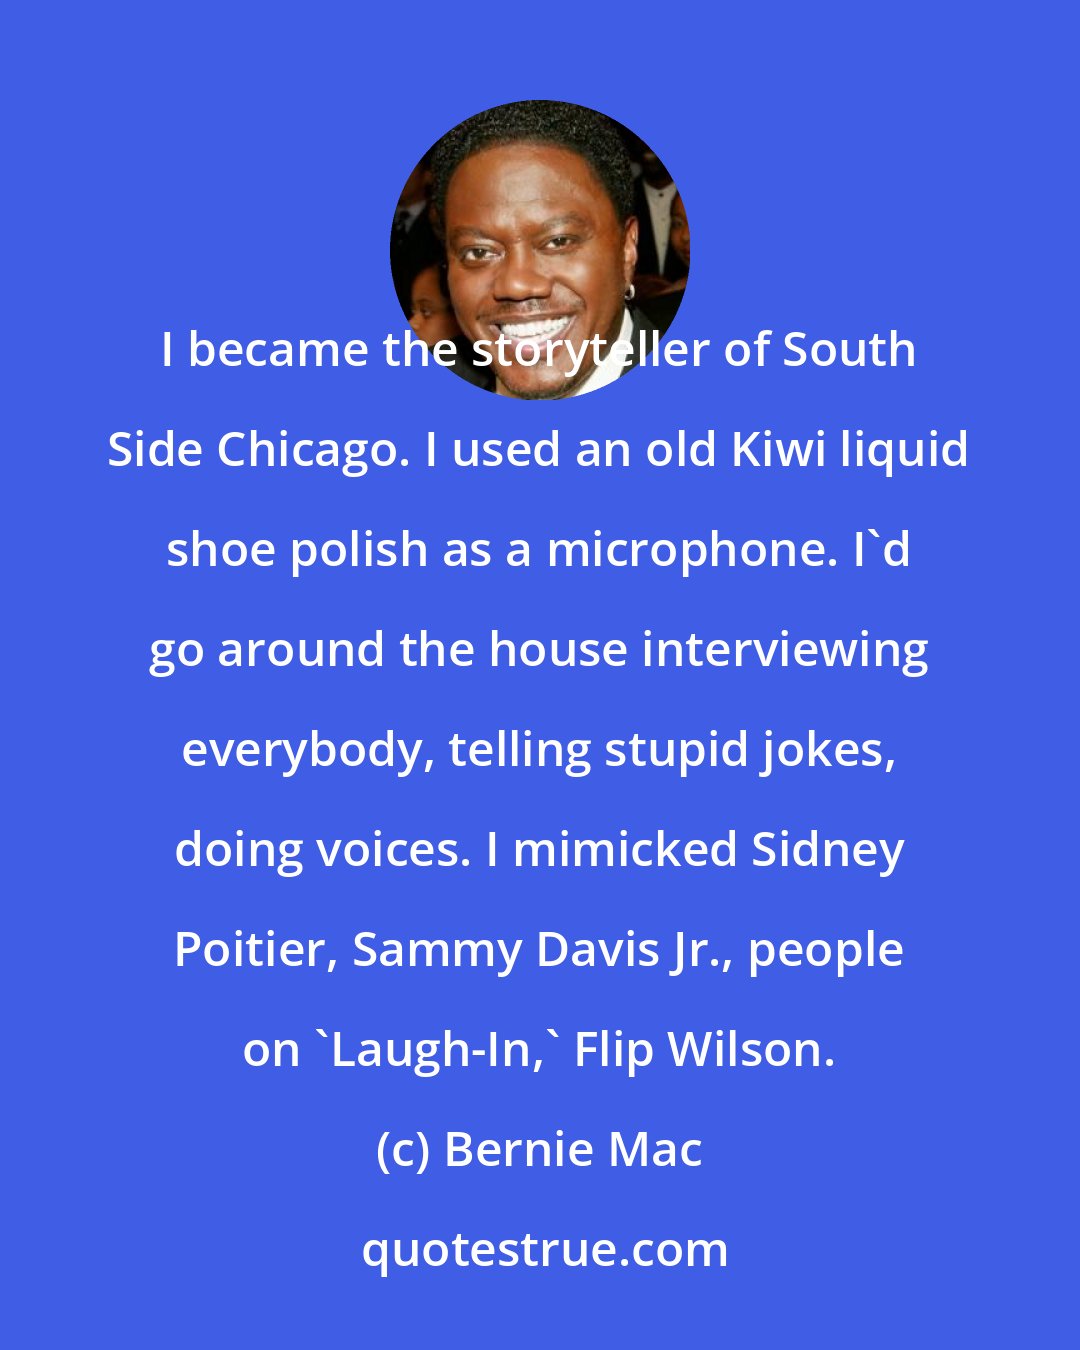 Bernie Mac: I became the storyteller of South Side Chicago. I used an old Kiwi liquid shoe polish as a microphone. I'd go around the house interviewing everybody, telling stupid jokes, doing voices. I mimicked Sidney Poitier, Sammy Davis Jr., people on 'Laugh-In,' Flip Wilson.